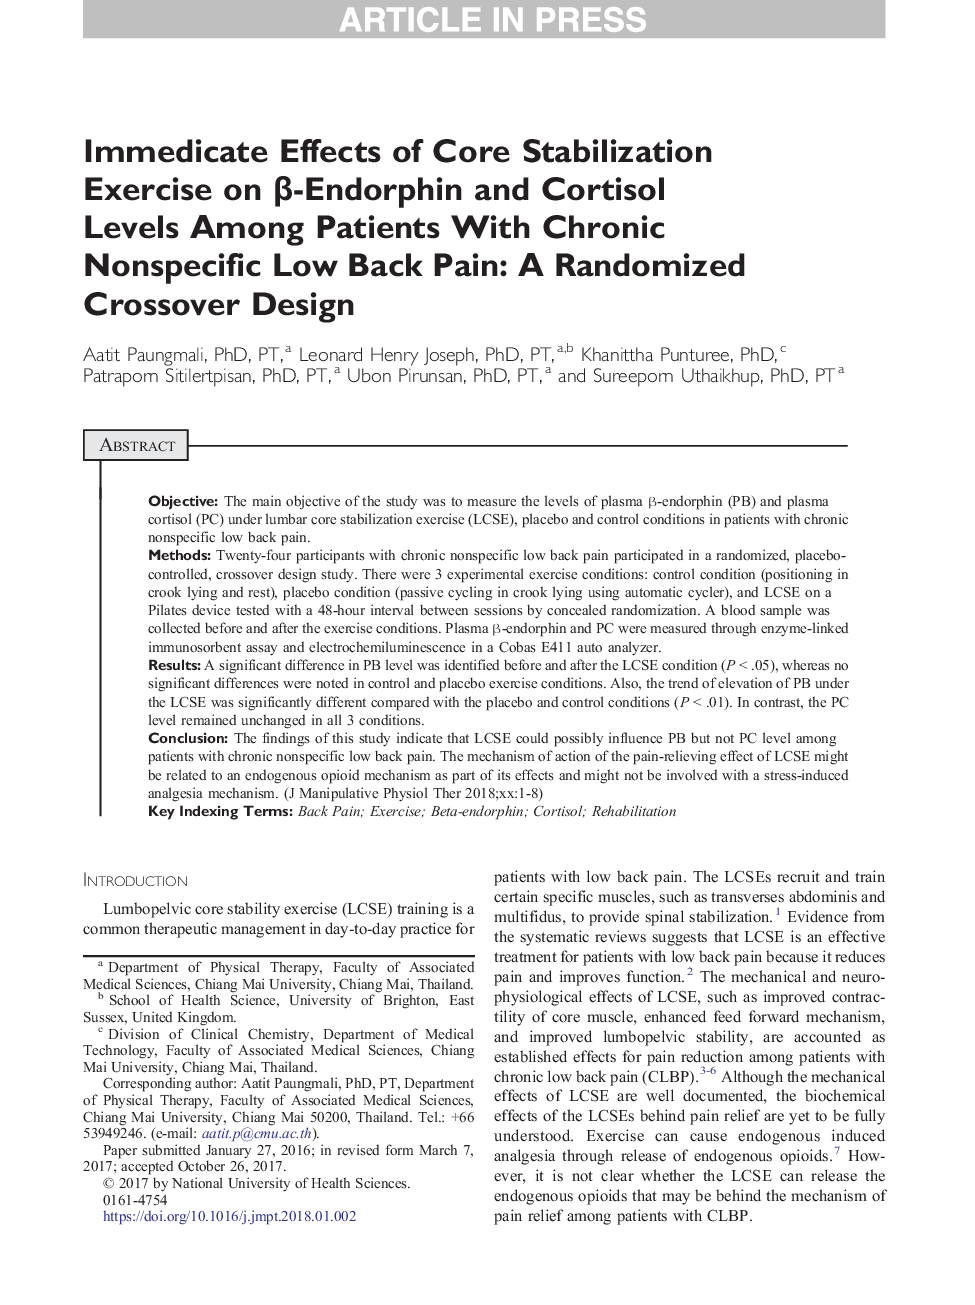 Immediate Effects of Core Stabilization Exercise on Î²-Endorphin and Cortisol Levels Among Patients With Chronic Nonspecific Low Back Pain: A Randomized Crossover Design